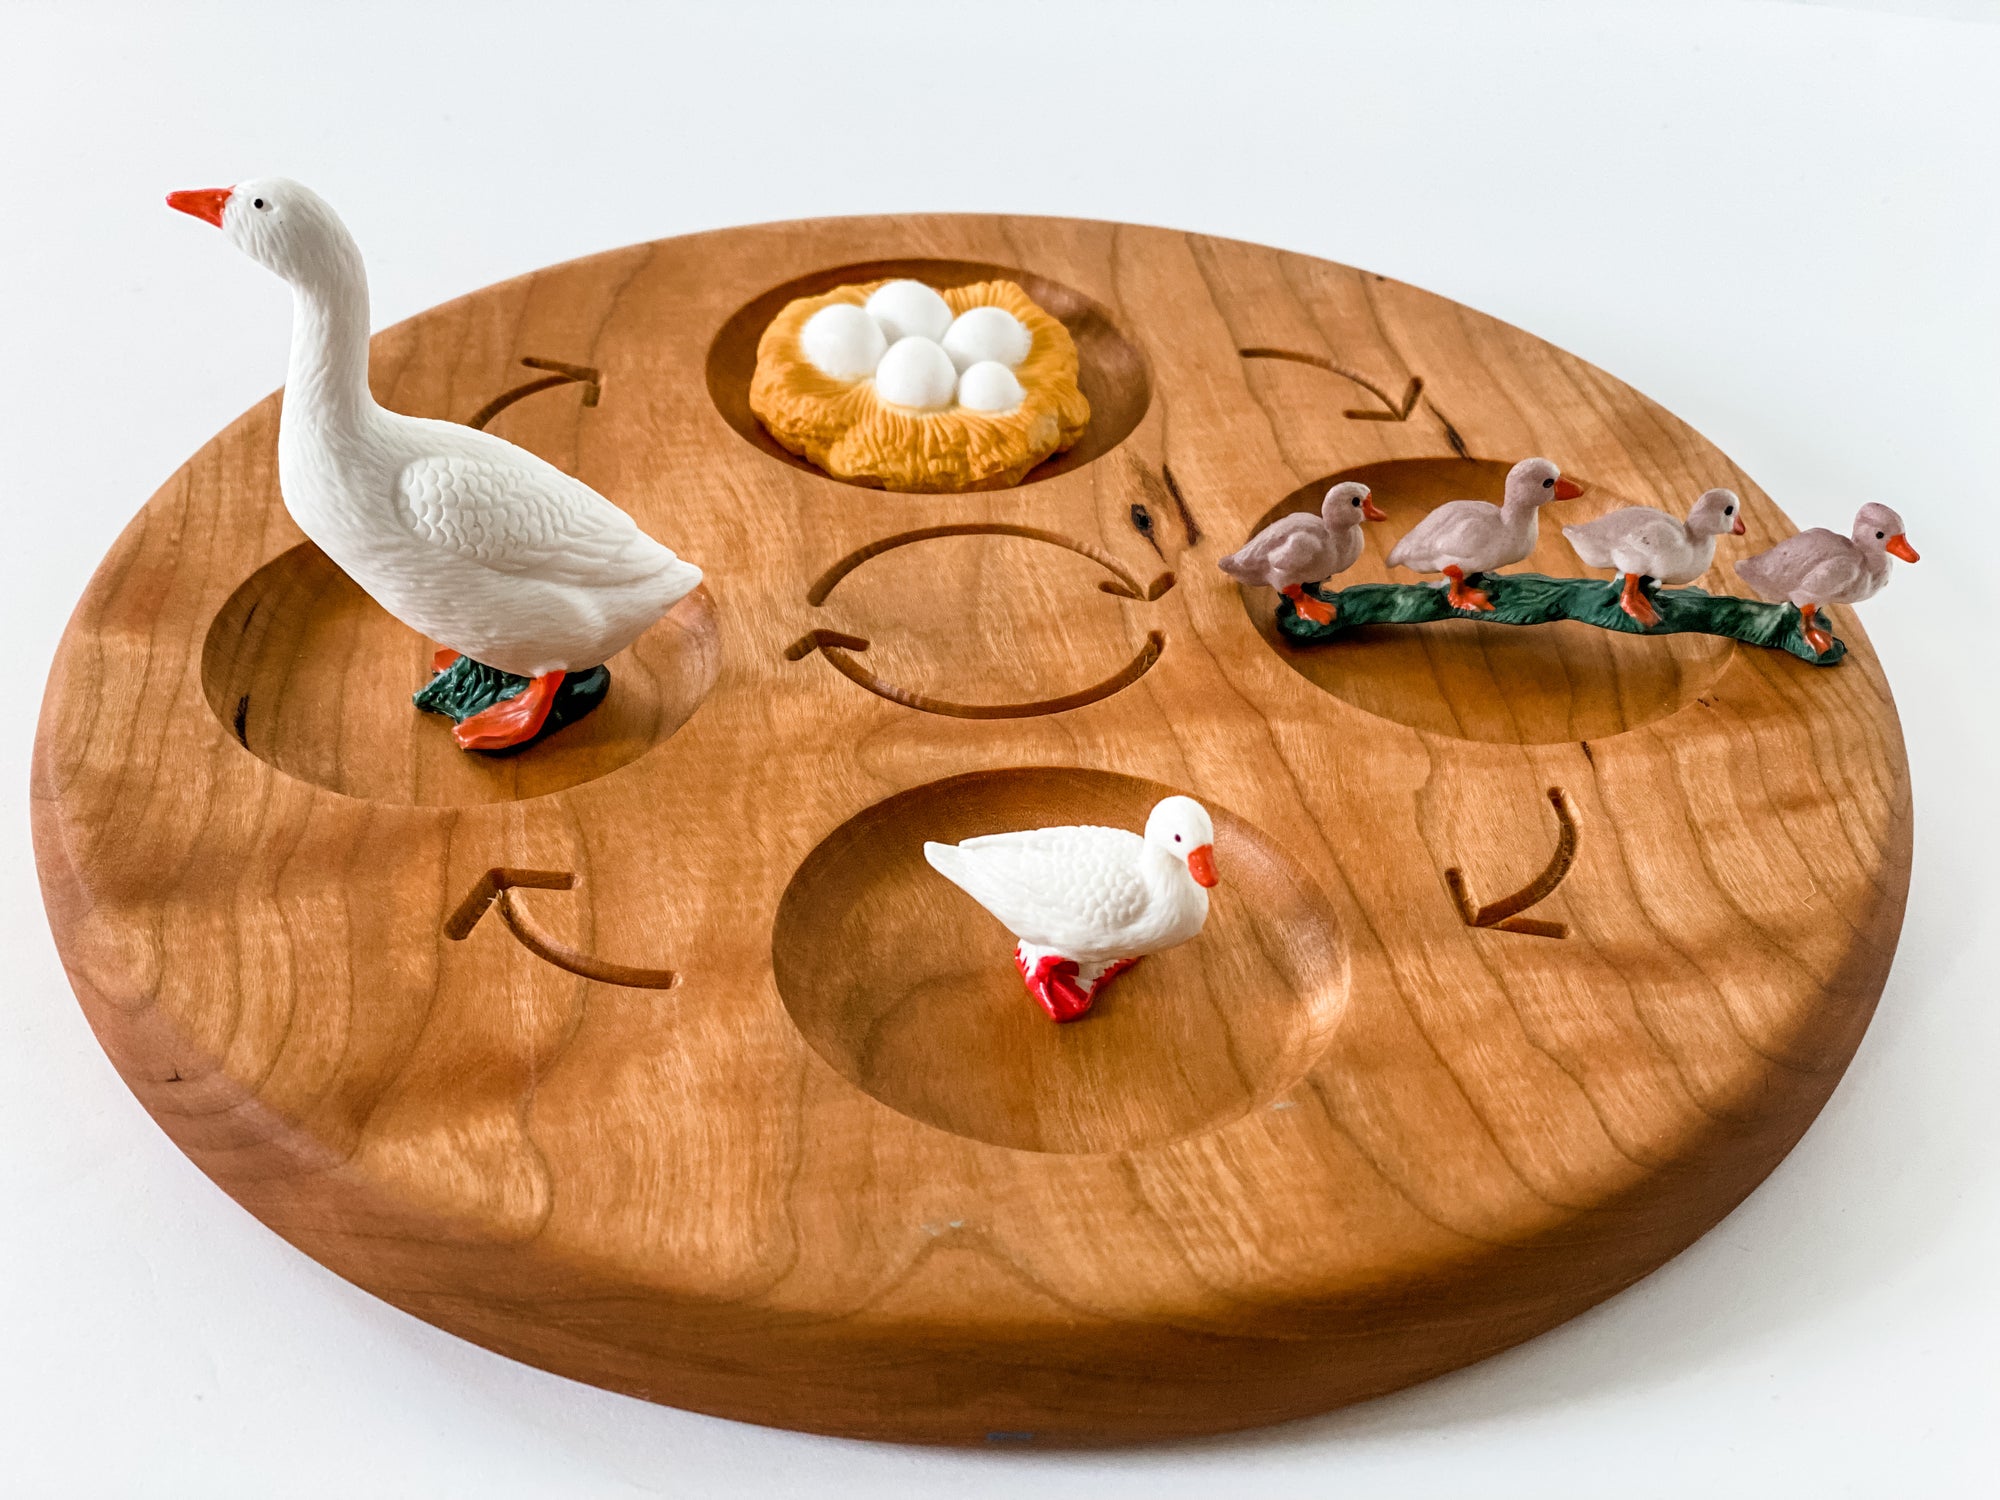 Goose Life Cycle Figurines